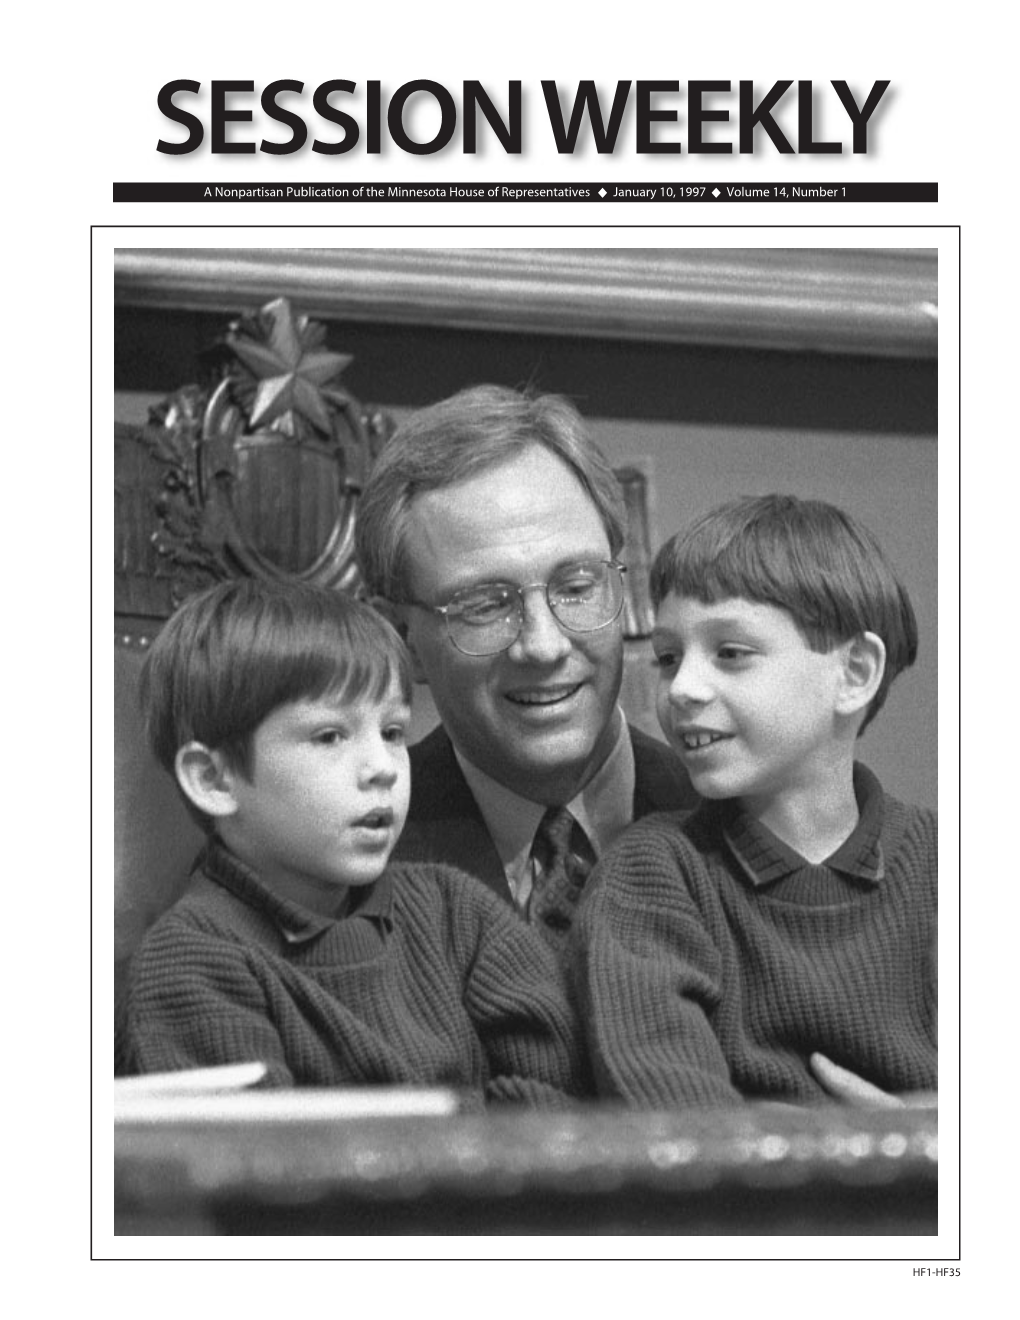 SESSION WEEKLY a Nonpartisan Publication of the Minnesota House of Representatives ◆ January 10, 1997 ◆ Volume 14, Number 1